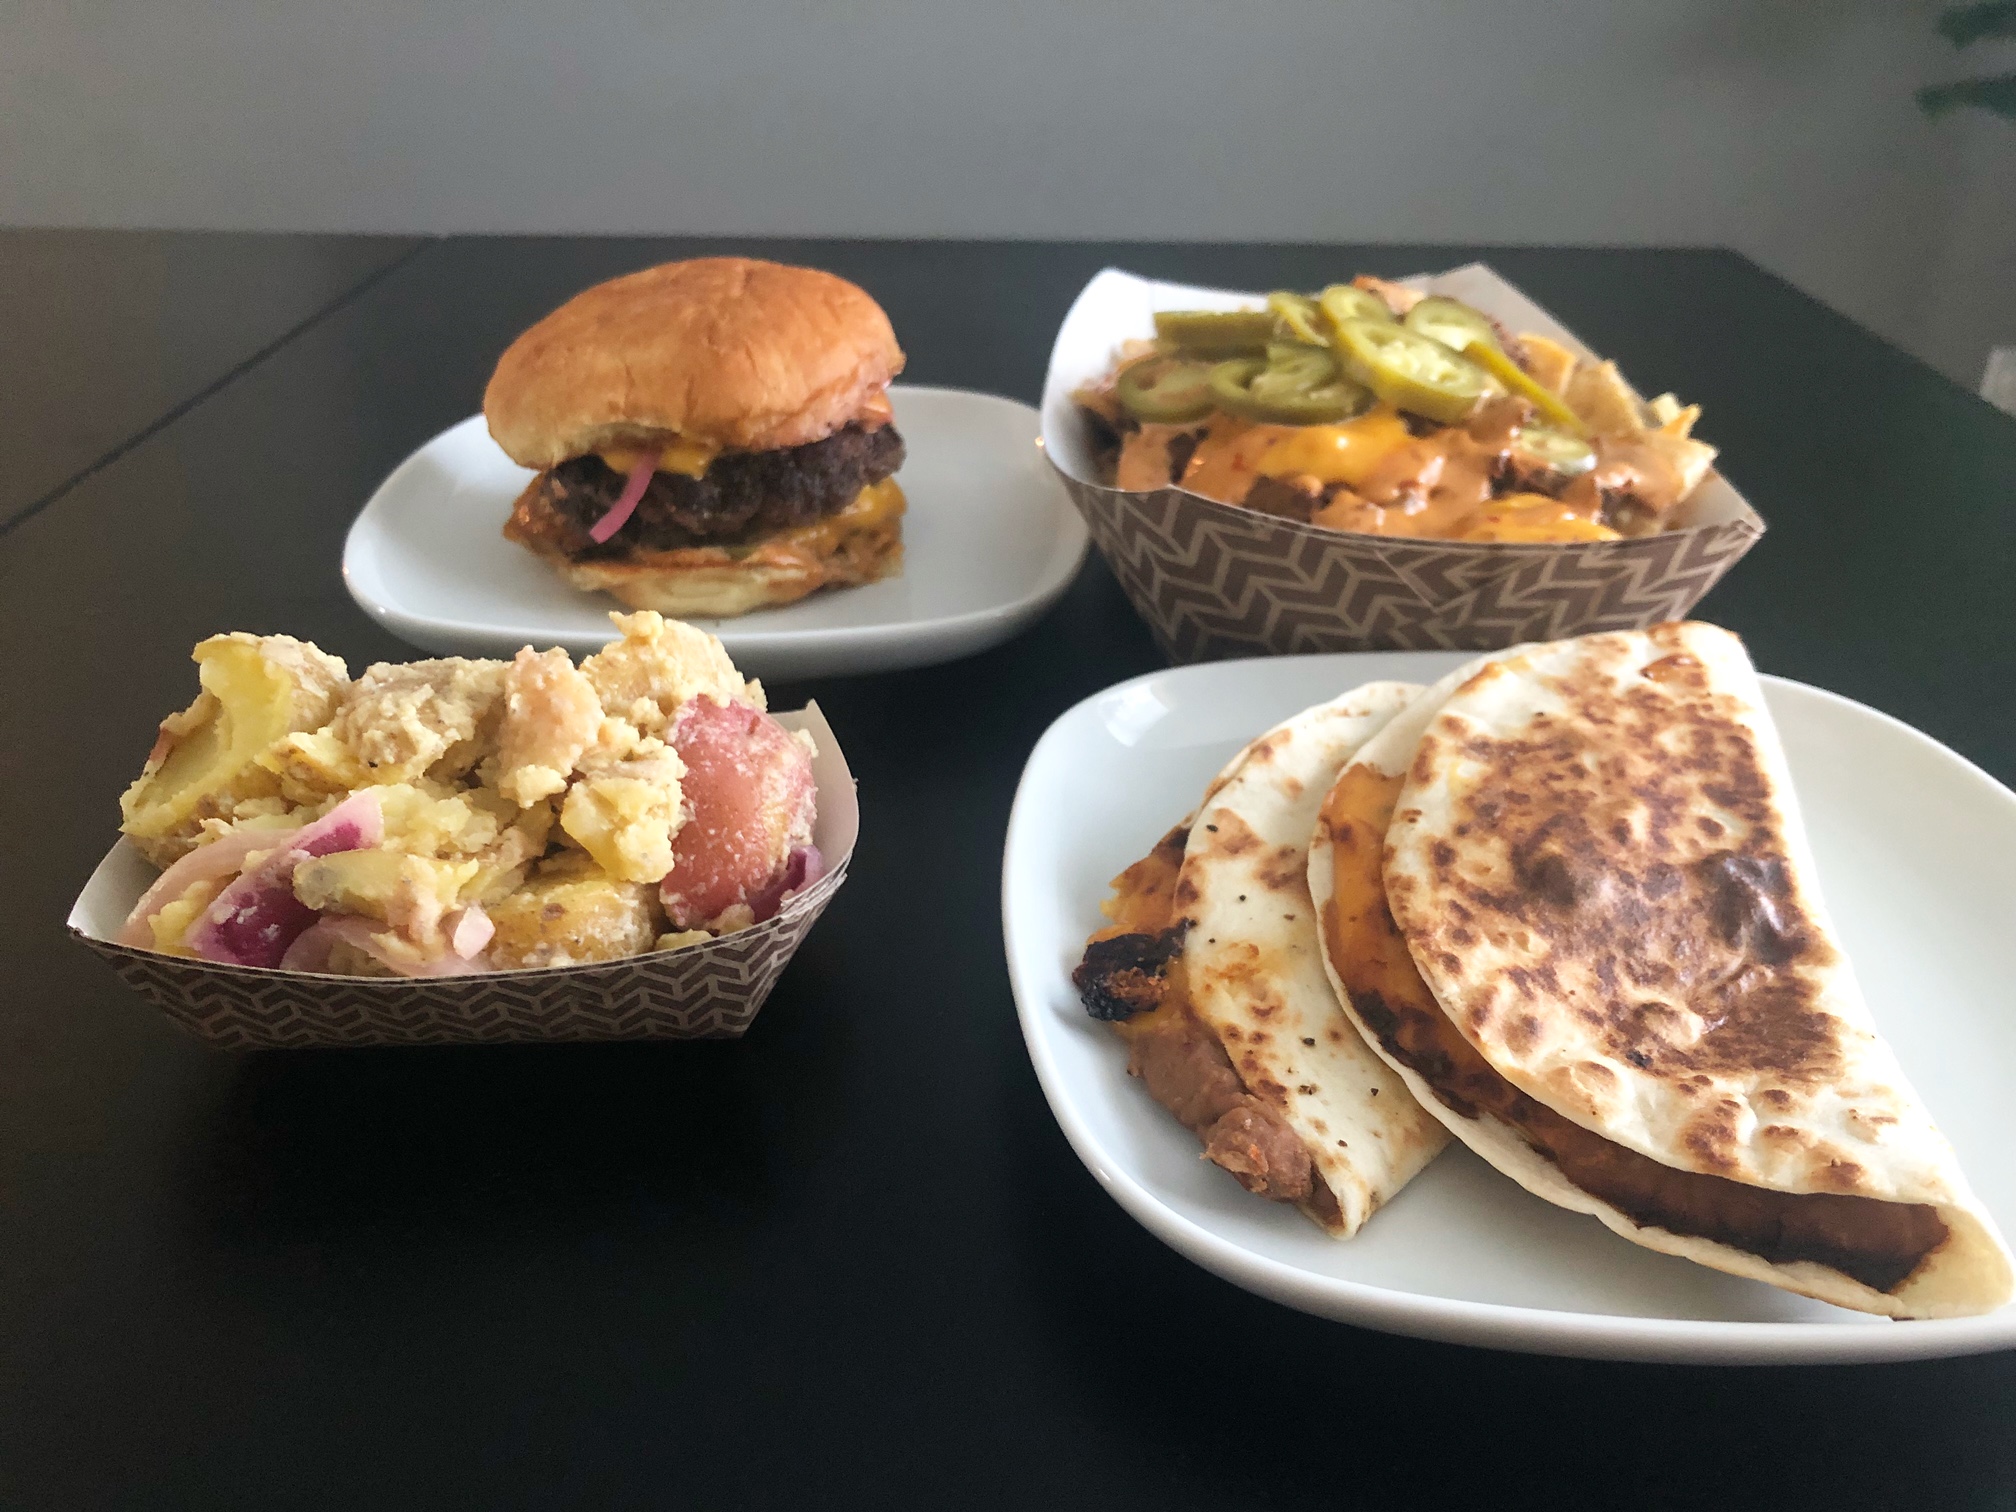 The author's dinner from the pop up food truck, starting with the bottom left: potato salad in a paper basket, above that a burger on a white square plate, beside that a paper basket of nachos, and below is a white square plate with two bean tacos on it. Photo by Alyssa Buckley.